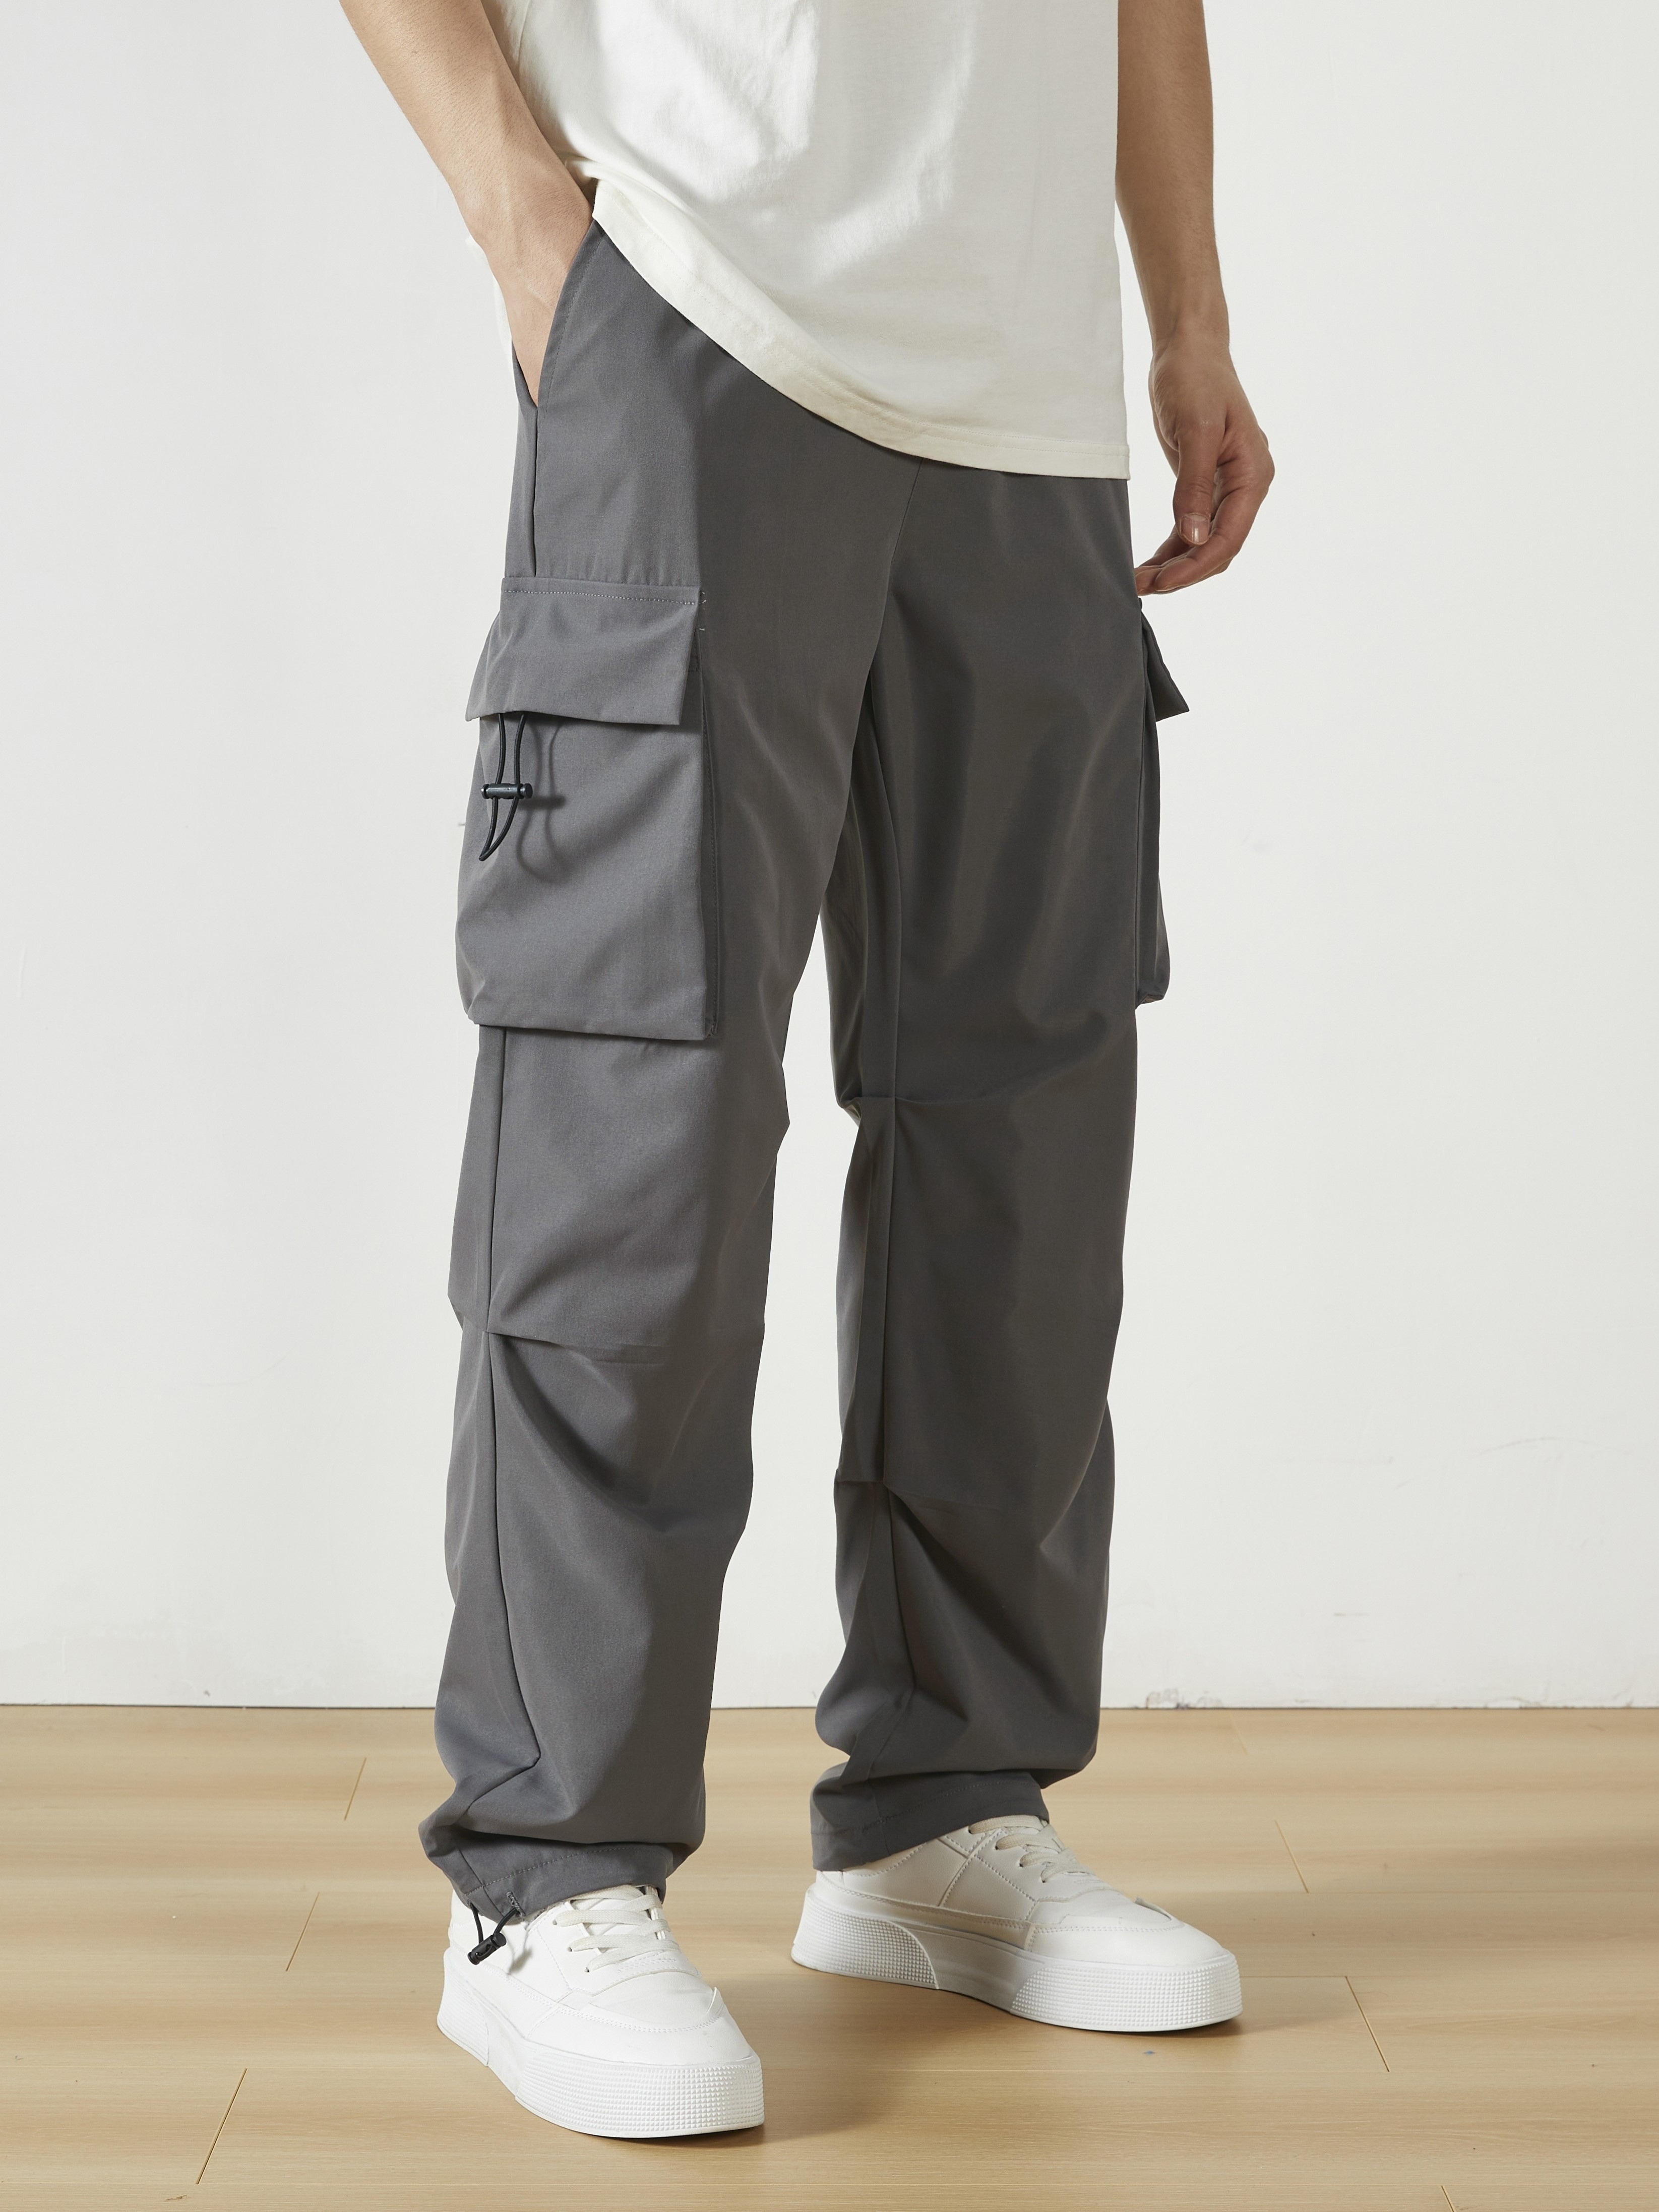 Men's Casual Flap Pocket Straight Leg Pants, Street Style Casual Pants For Outdoor Activities